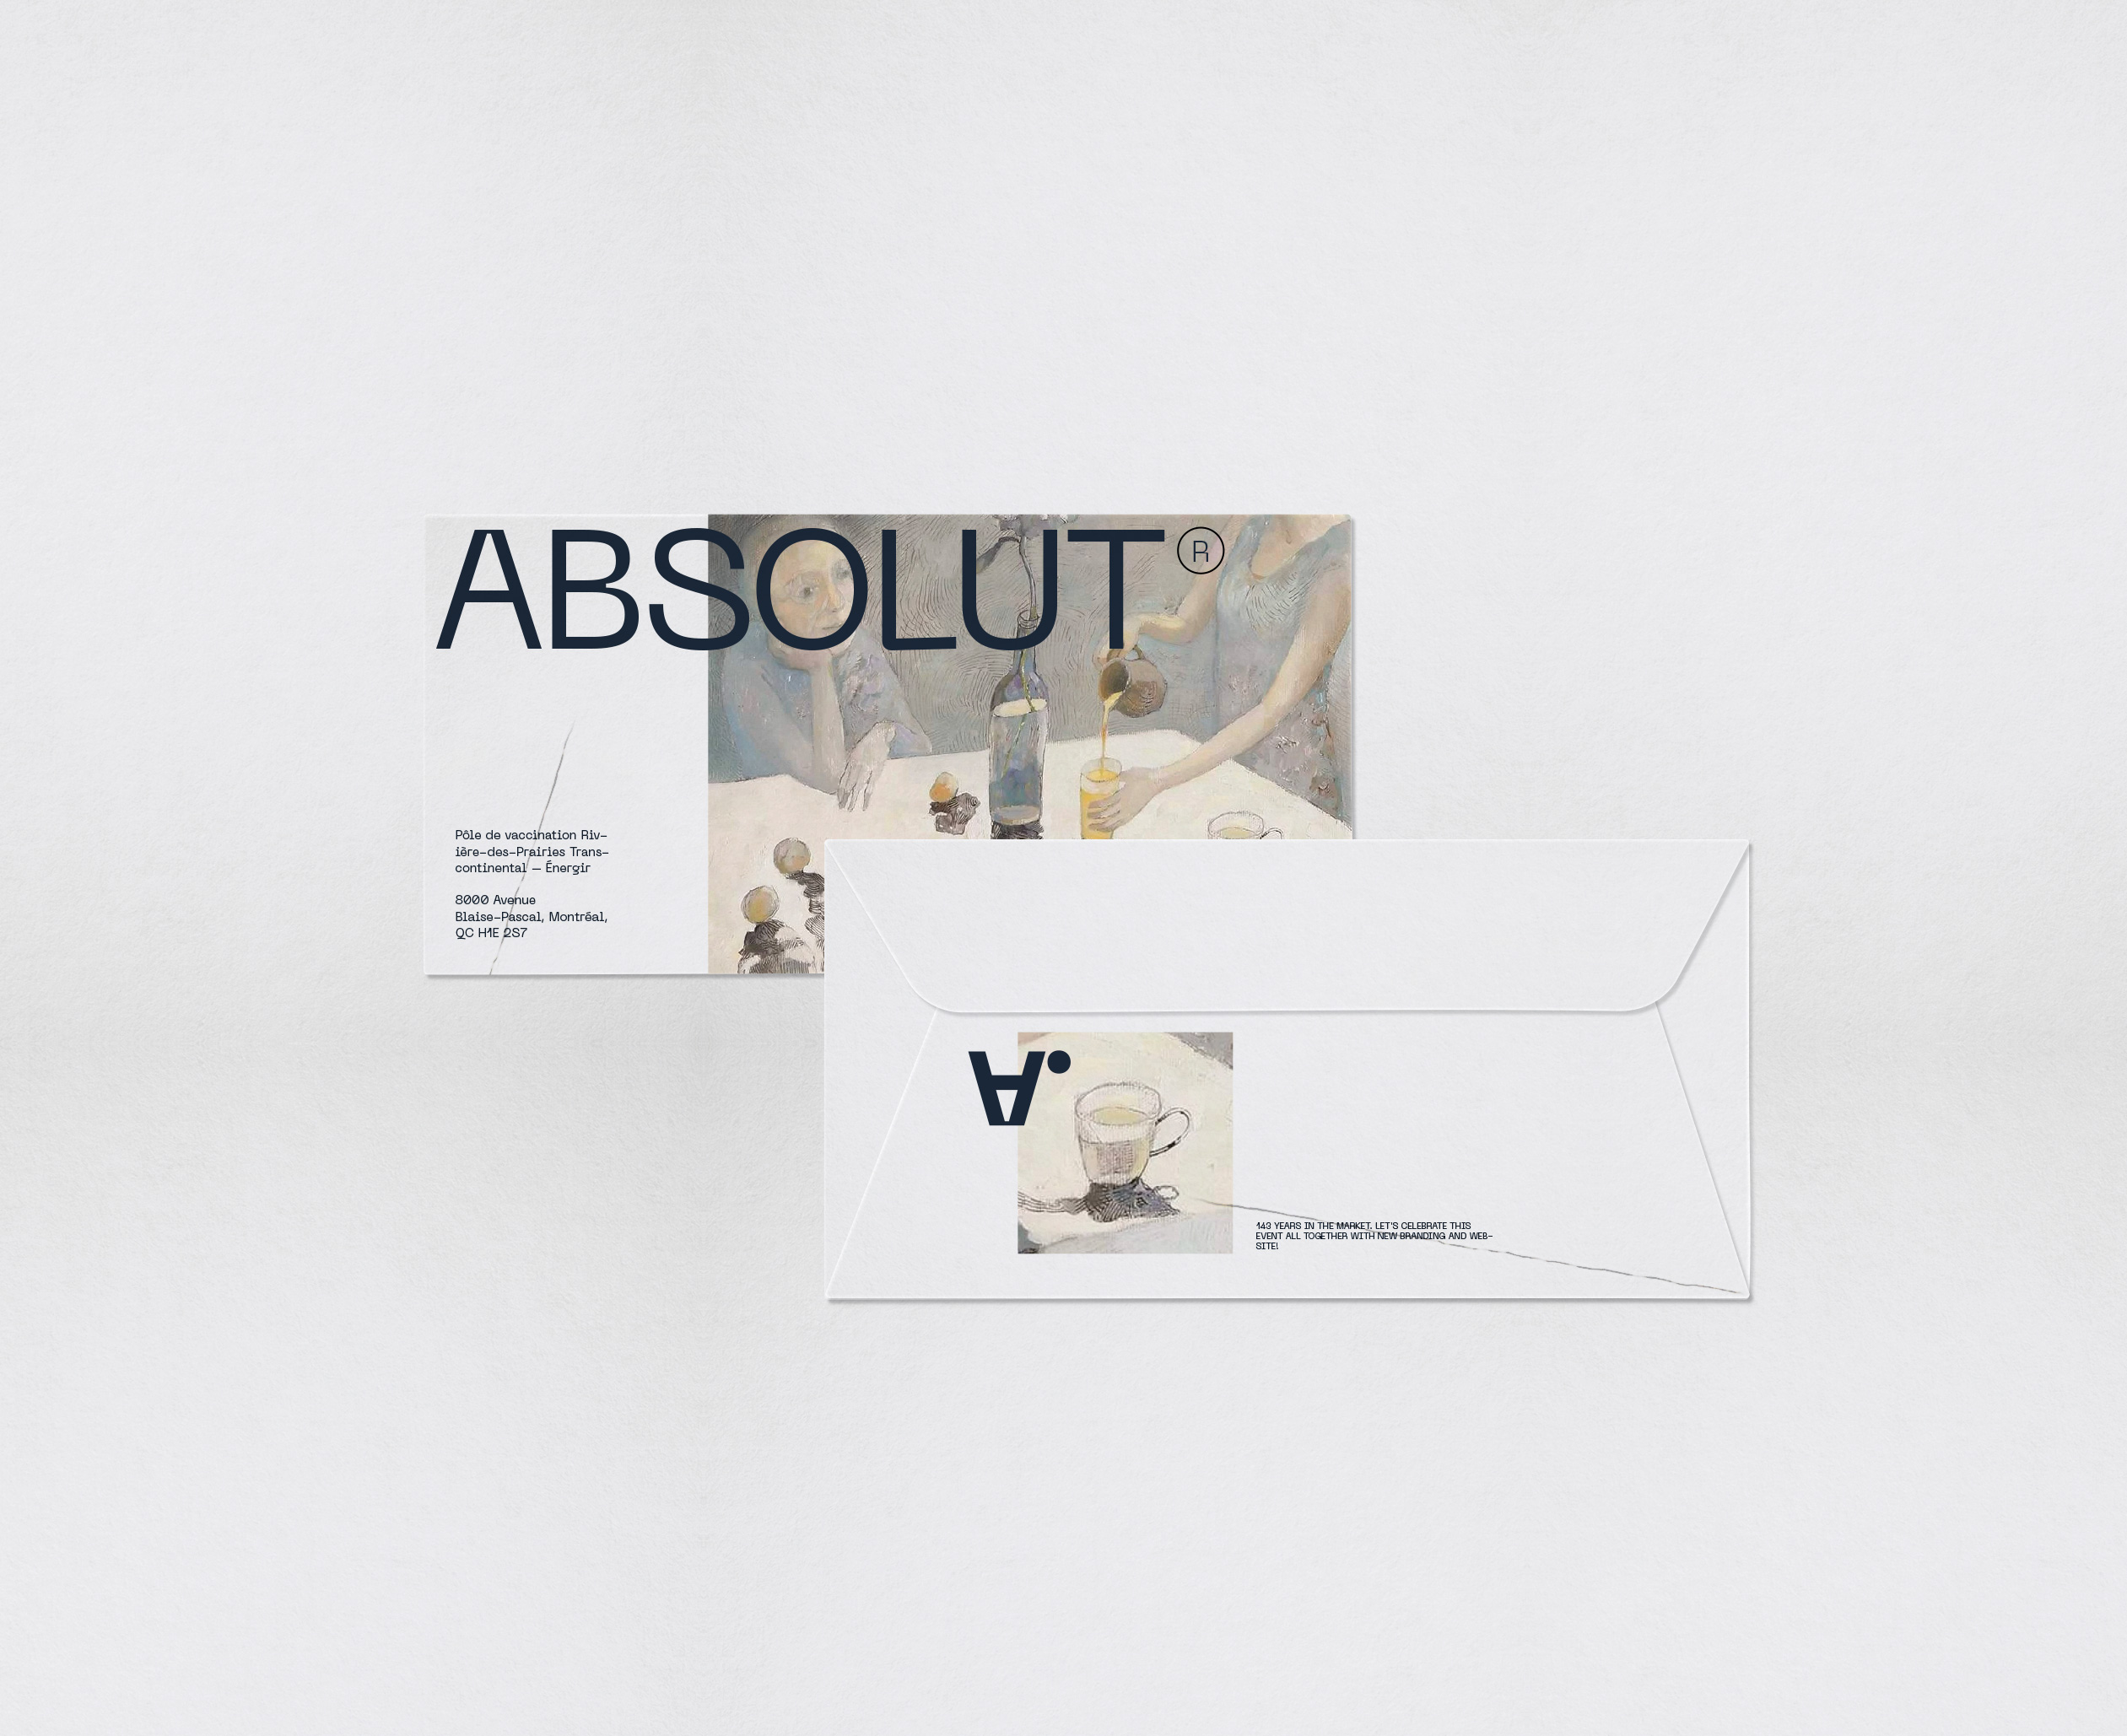 This Absolut vodka 143 celebration vision was inspired by works of great artist - Liza Zabarsky